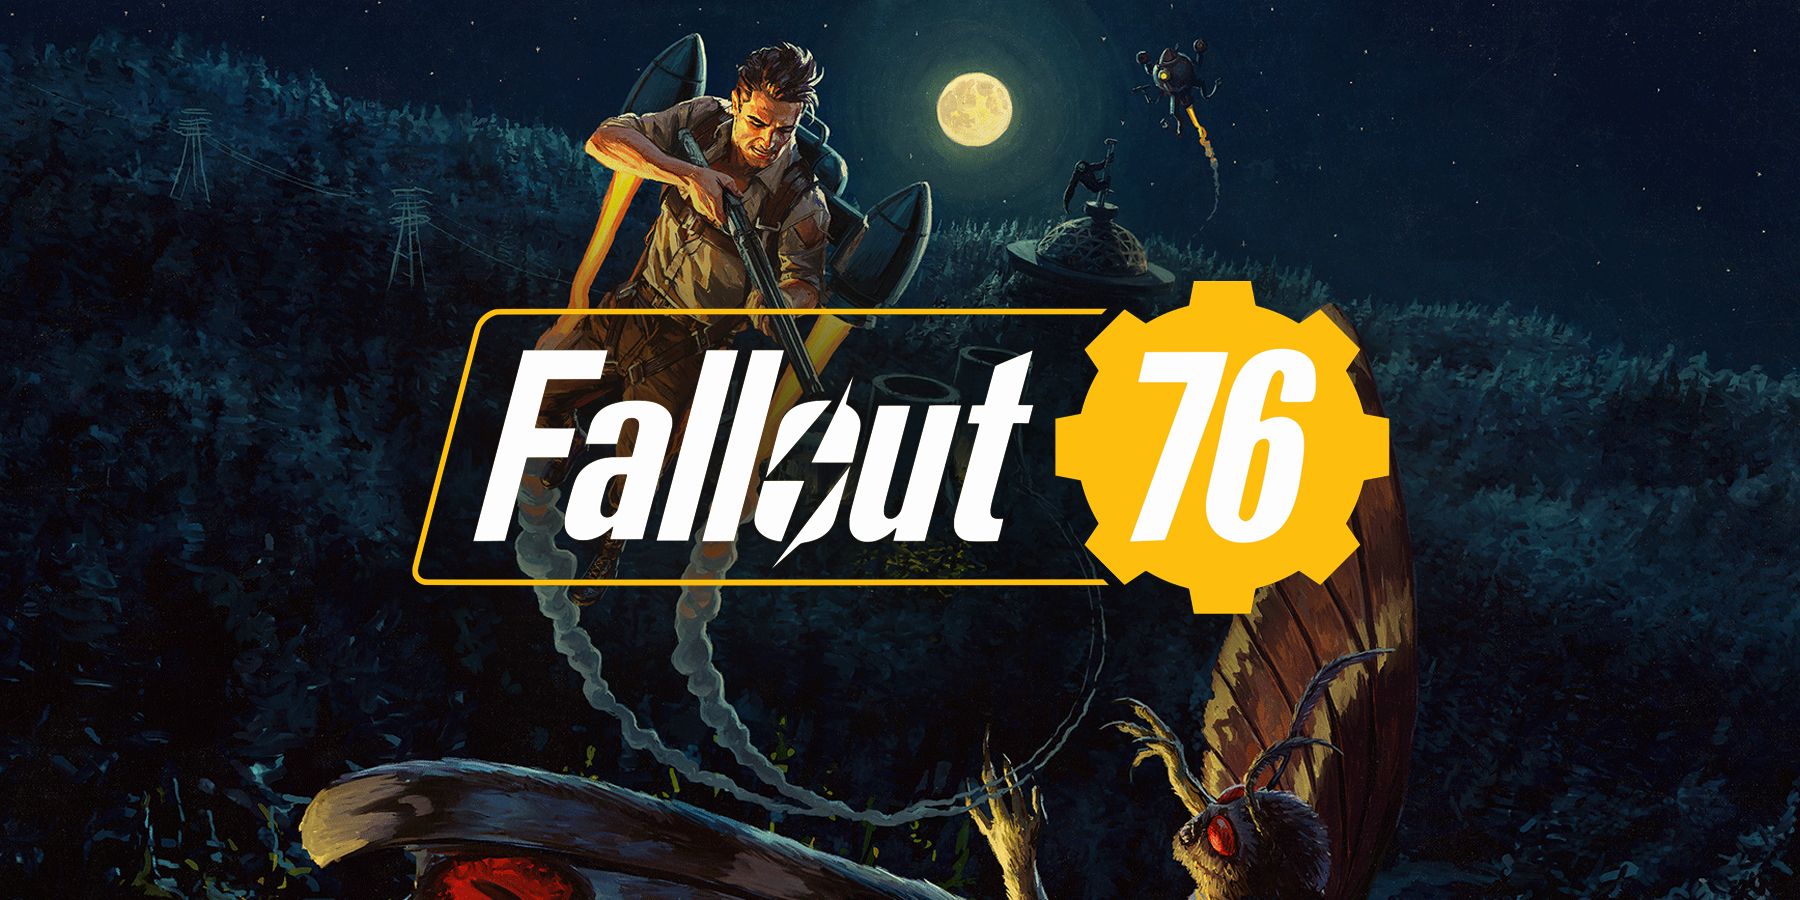 Fallout 76 Season 12 announcement and updates needs more questing content.